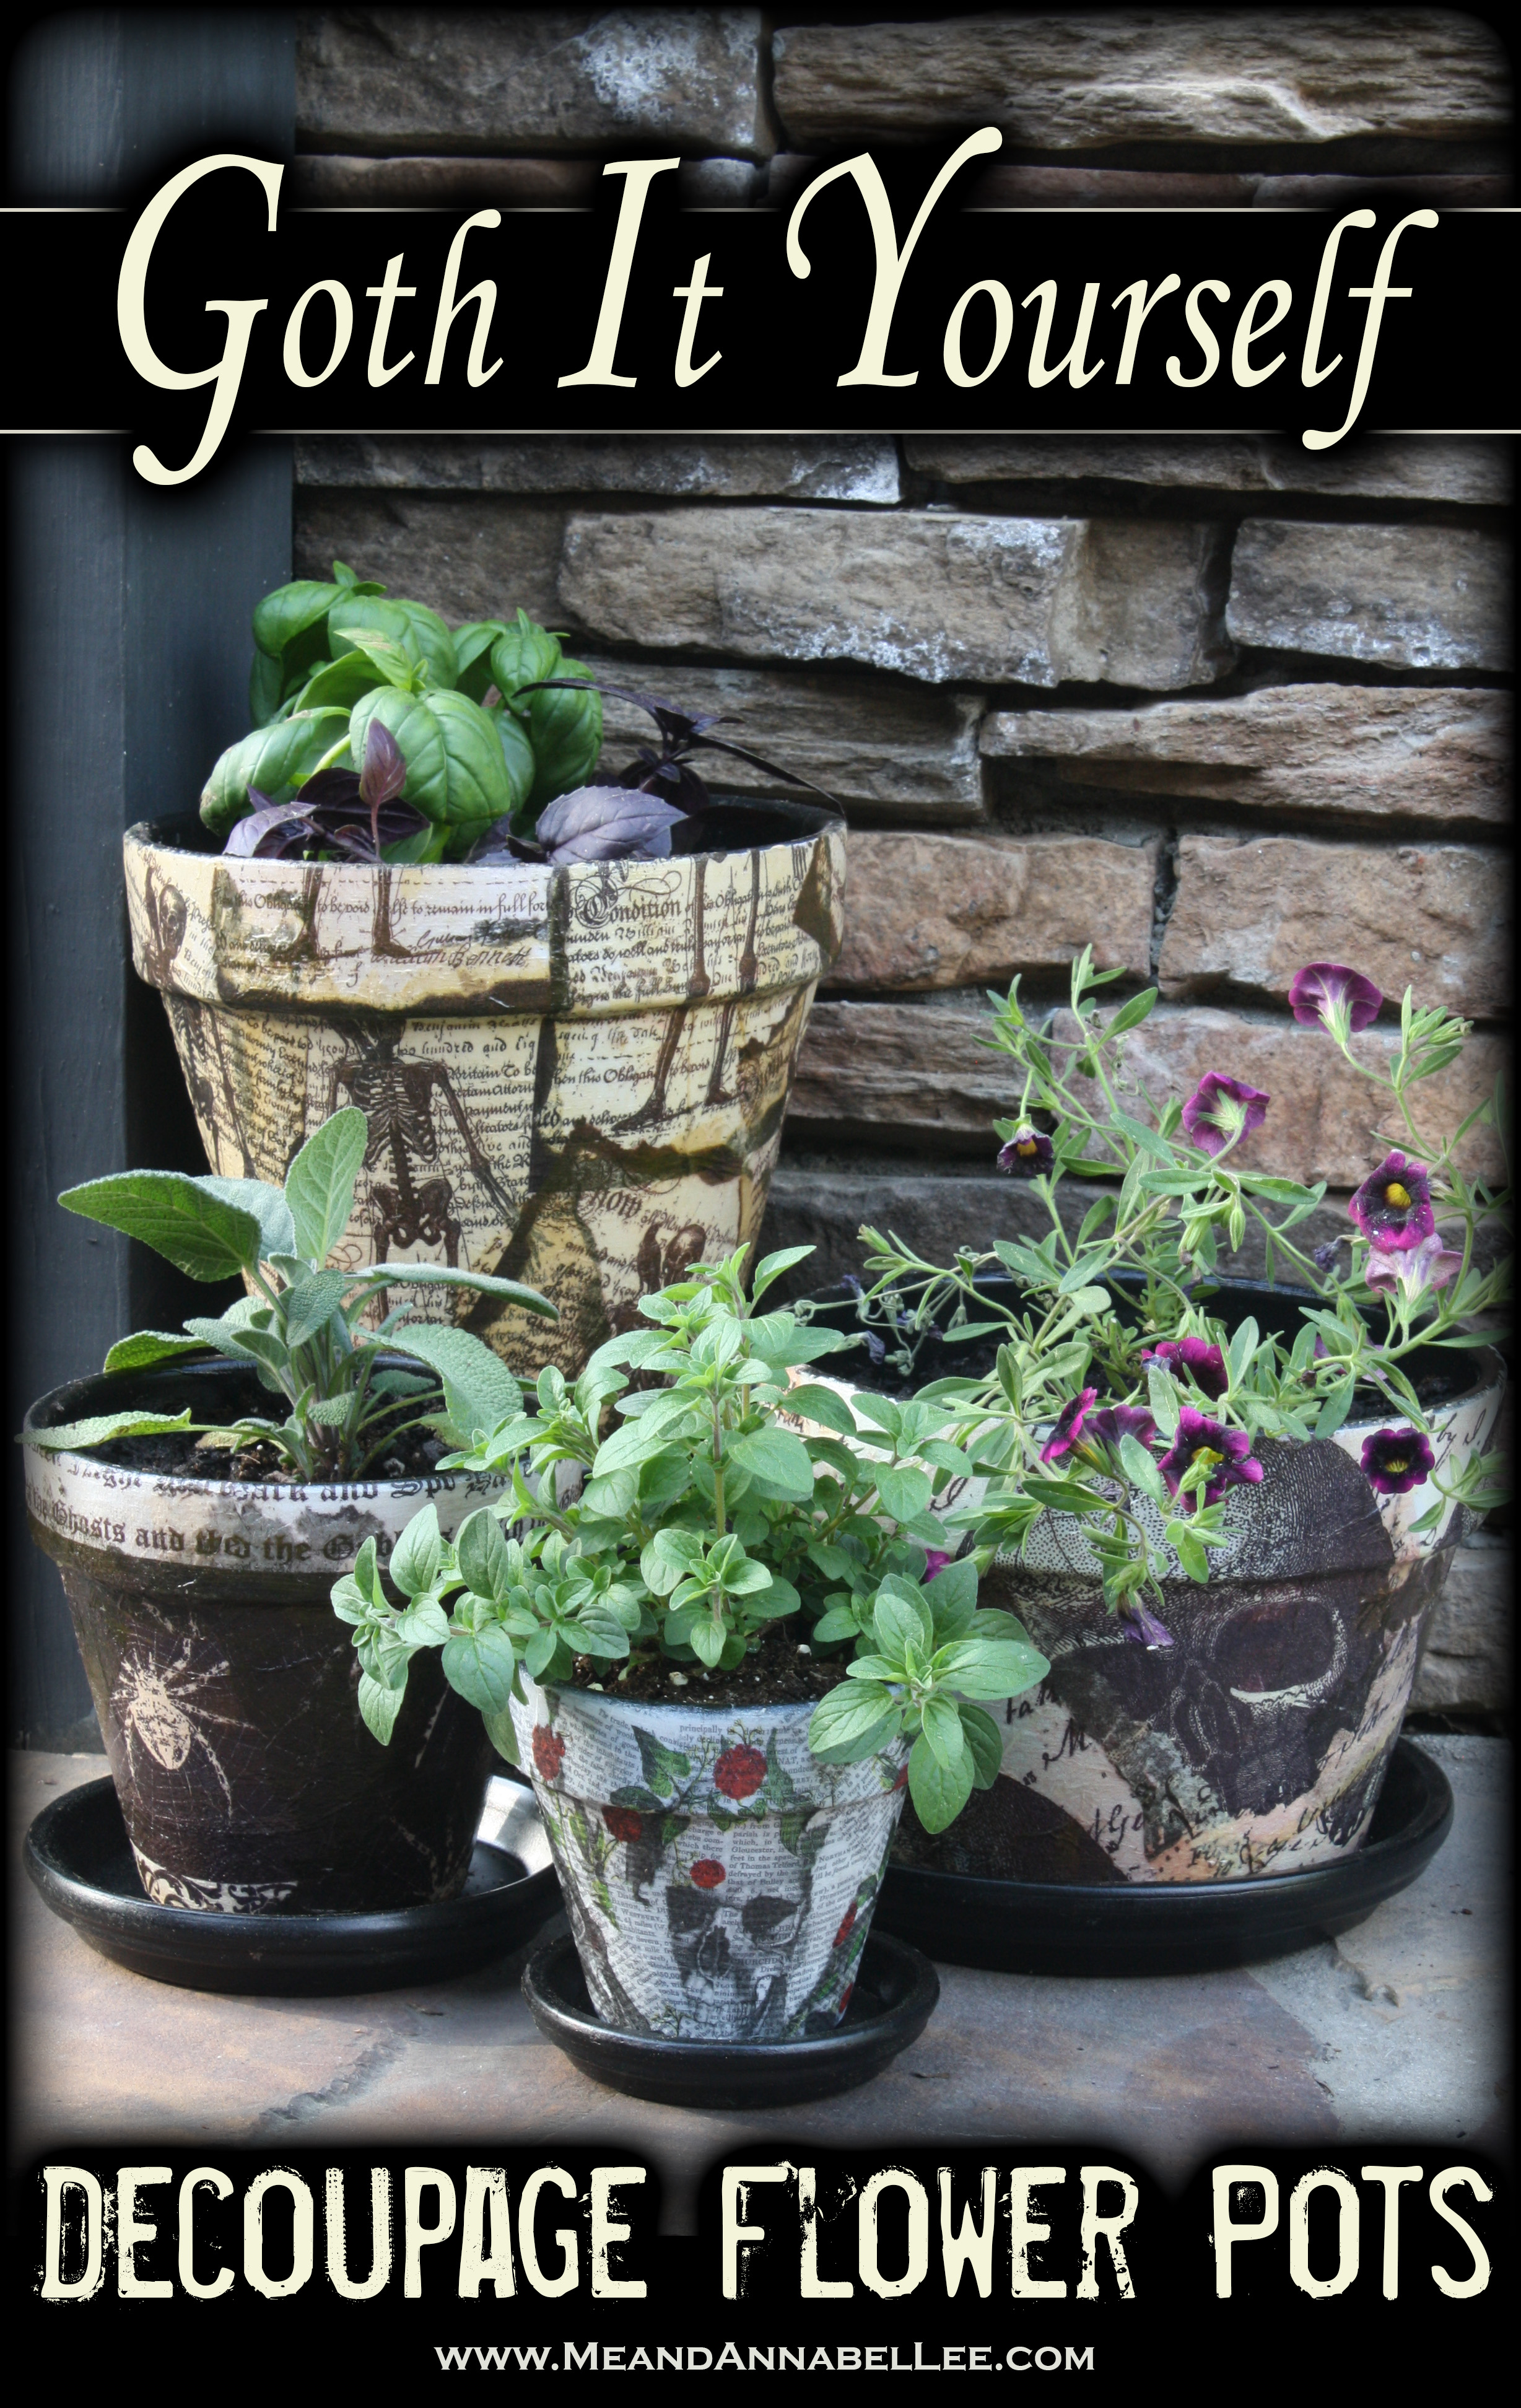 DIY Halloween Inspired Skull and Spider Flower Pots | How to Decoupage with Napkins | Gothic Garden | Skull Planter | www.MeandAnnabelLee.com